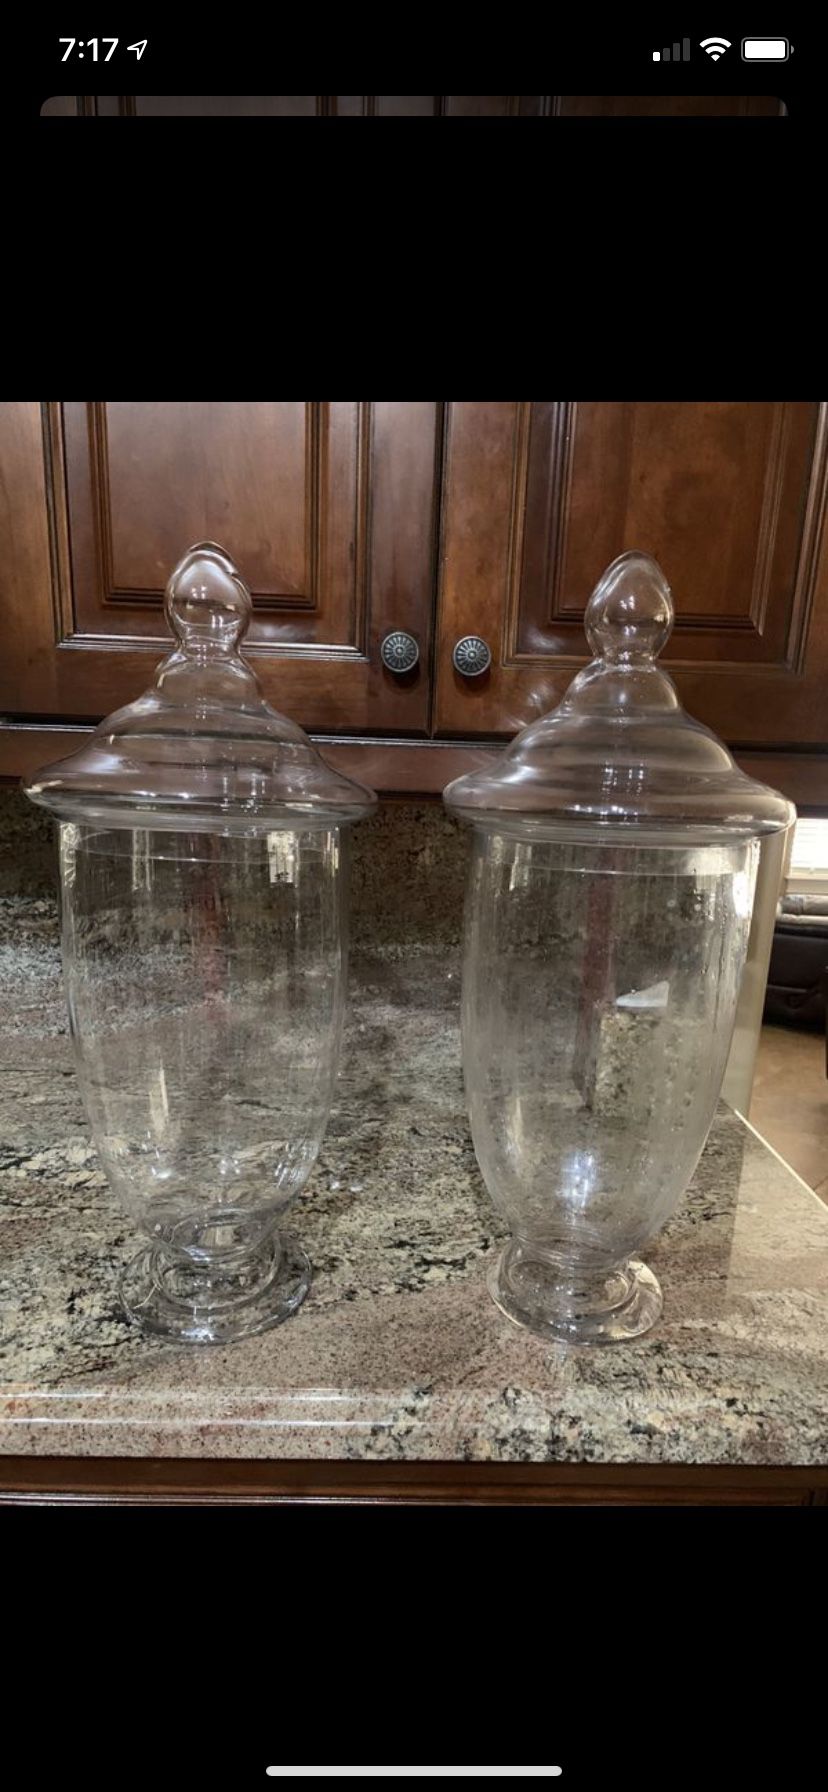 2 large apothecary jars 23” tall originally $60 each now $30 For 1 or both for $50